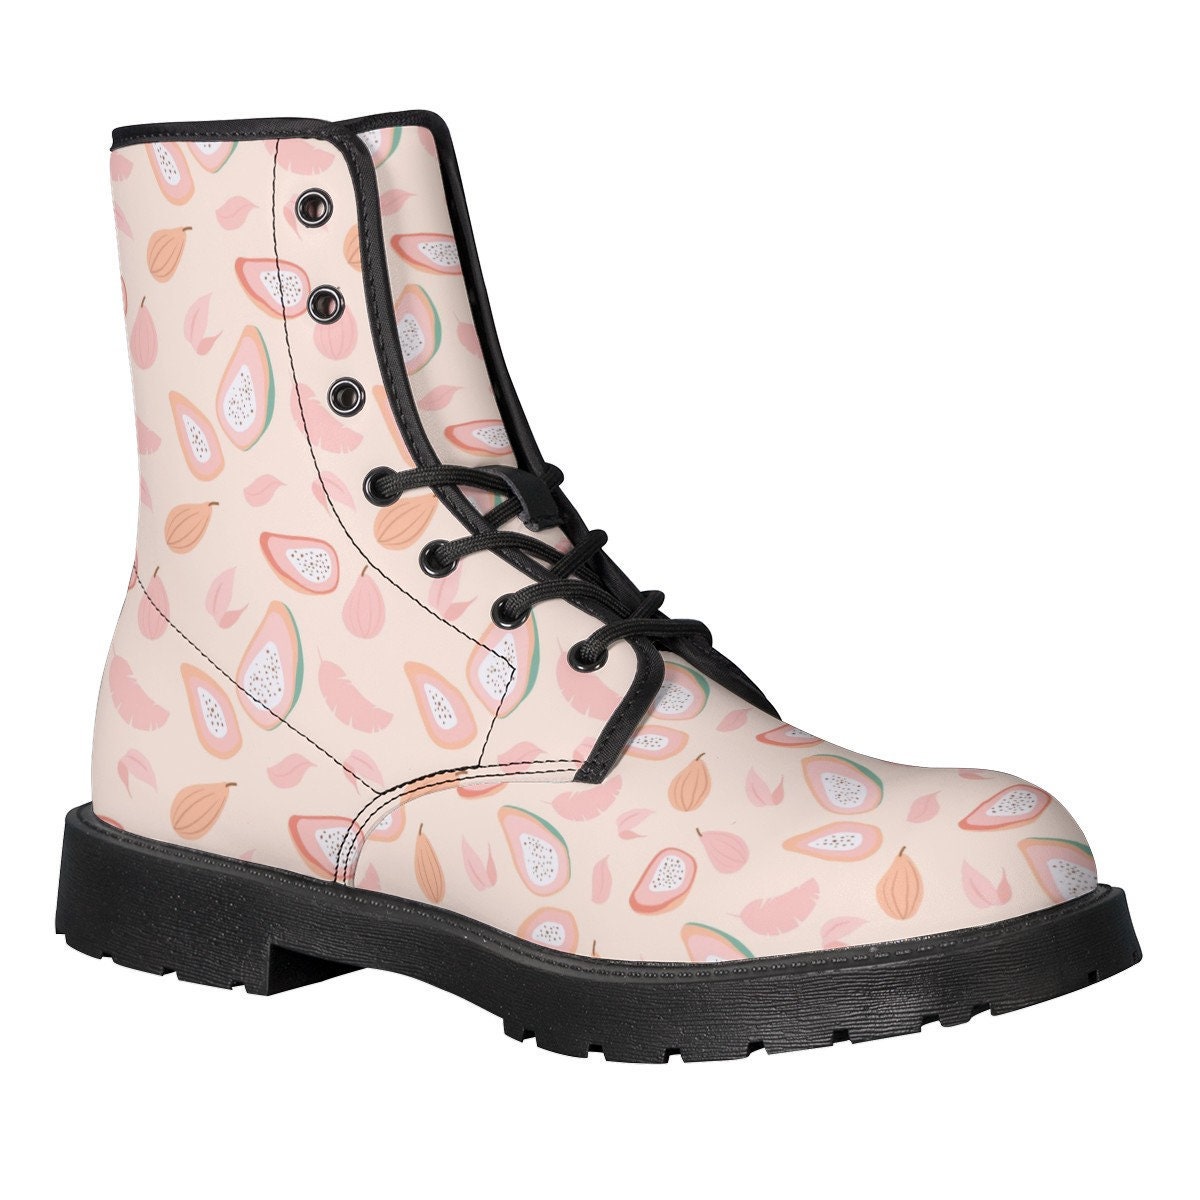 Guava Boots, Guava Fruit Leather Boots, Pink Guava Boots, Women Girl Gift, Classic Boot